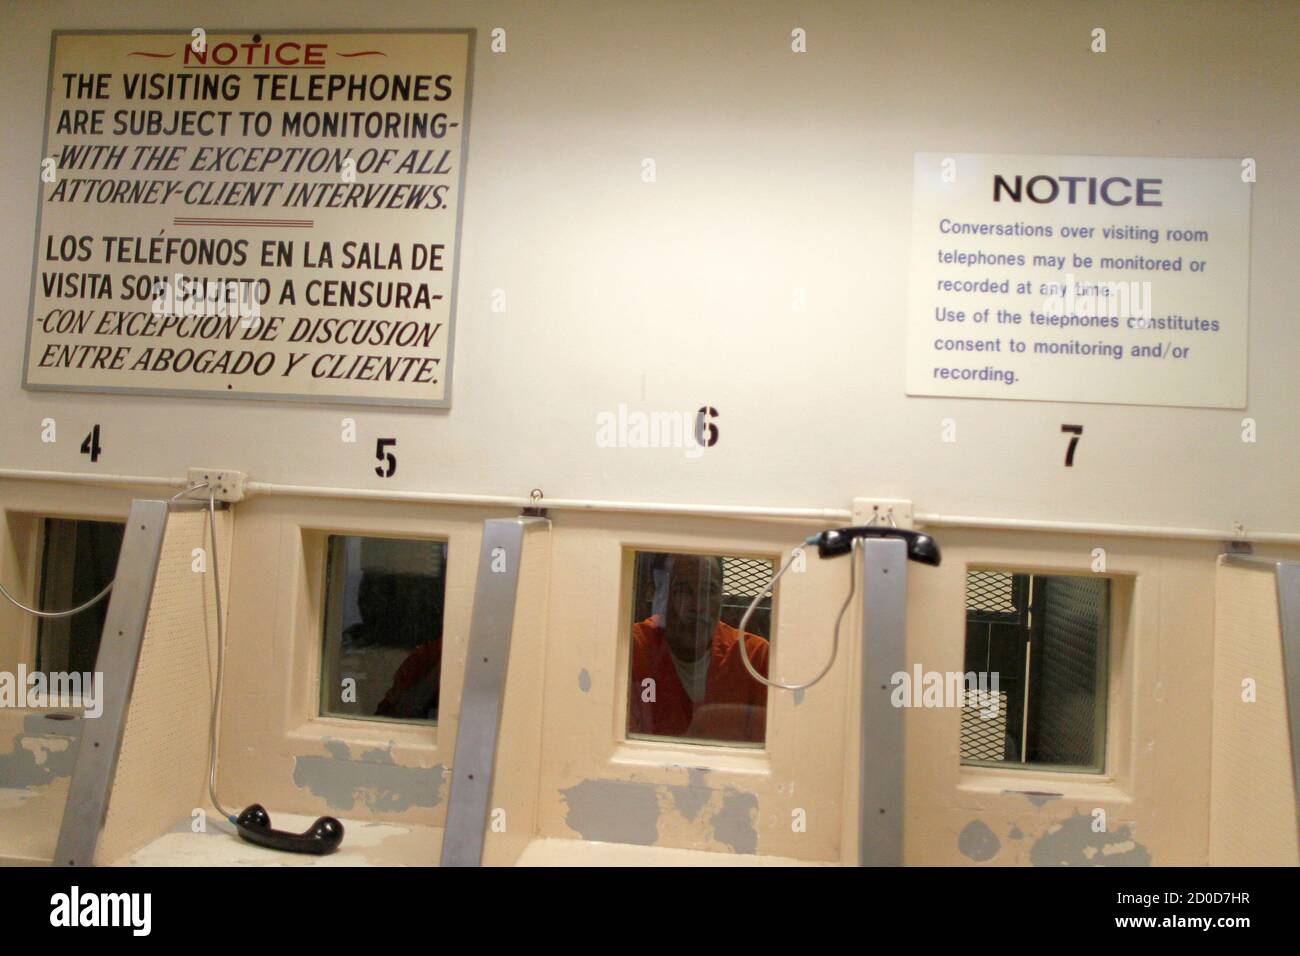 An inmate waits for a visitor at the California Institution for Men state prison in Chino, California, June 3, 2011. The Supreme Court has ordered California to release more than 30,000 inmates over the next two years or take other steps to ease overcrowding in its prisons to prevent 'needless suffering and death.' California's 33 adult prisons were designed to hold about 80,000 inmates and now have about 145,000. The United States has more than 2 million people in state and local prisons. It has long had the highest incarceration rate in the world. REUTERS/Lucy Nicholson (UNITED STATES - Tags Stock Photo